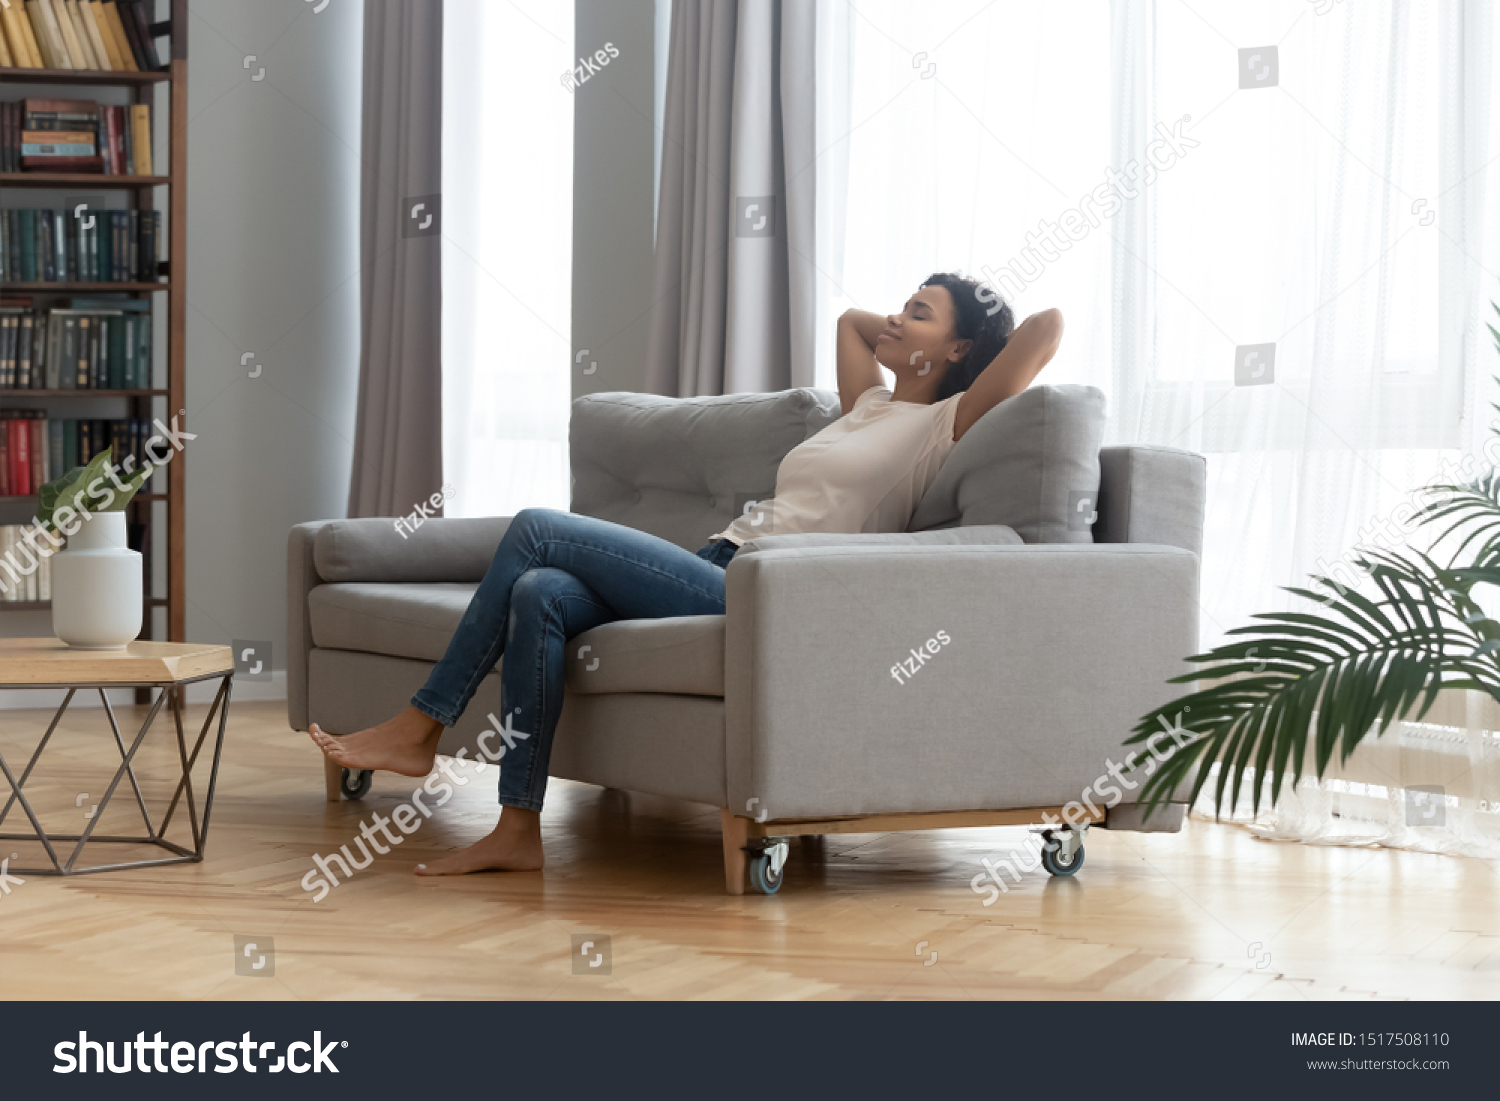 In modern living room peaceful african woman resting leaned on sofa closed eyes put hands behind head feels placidity enjoy weekend or vacation, inner harmony, no stress anxiety fatigue relief concept #1517508110